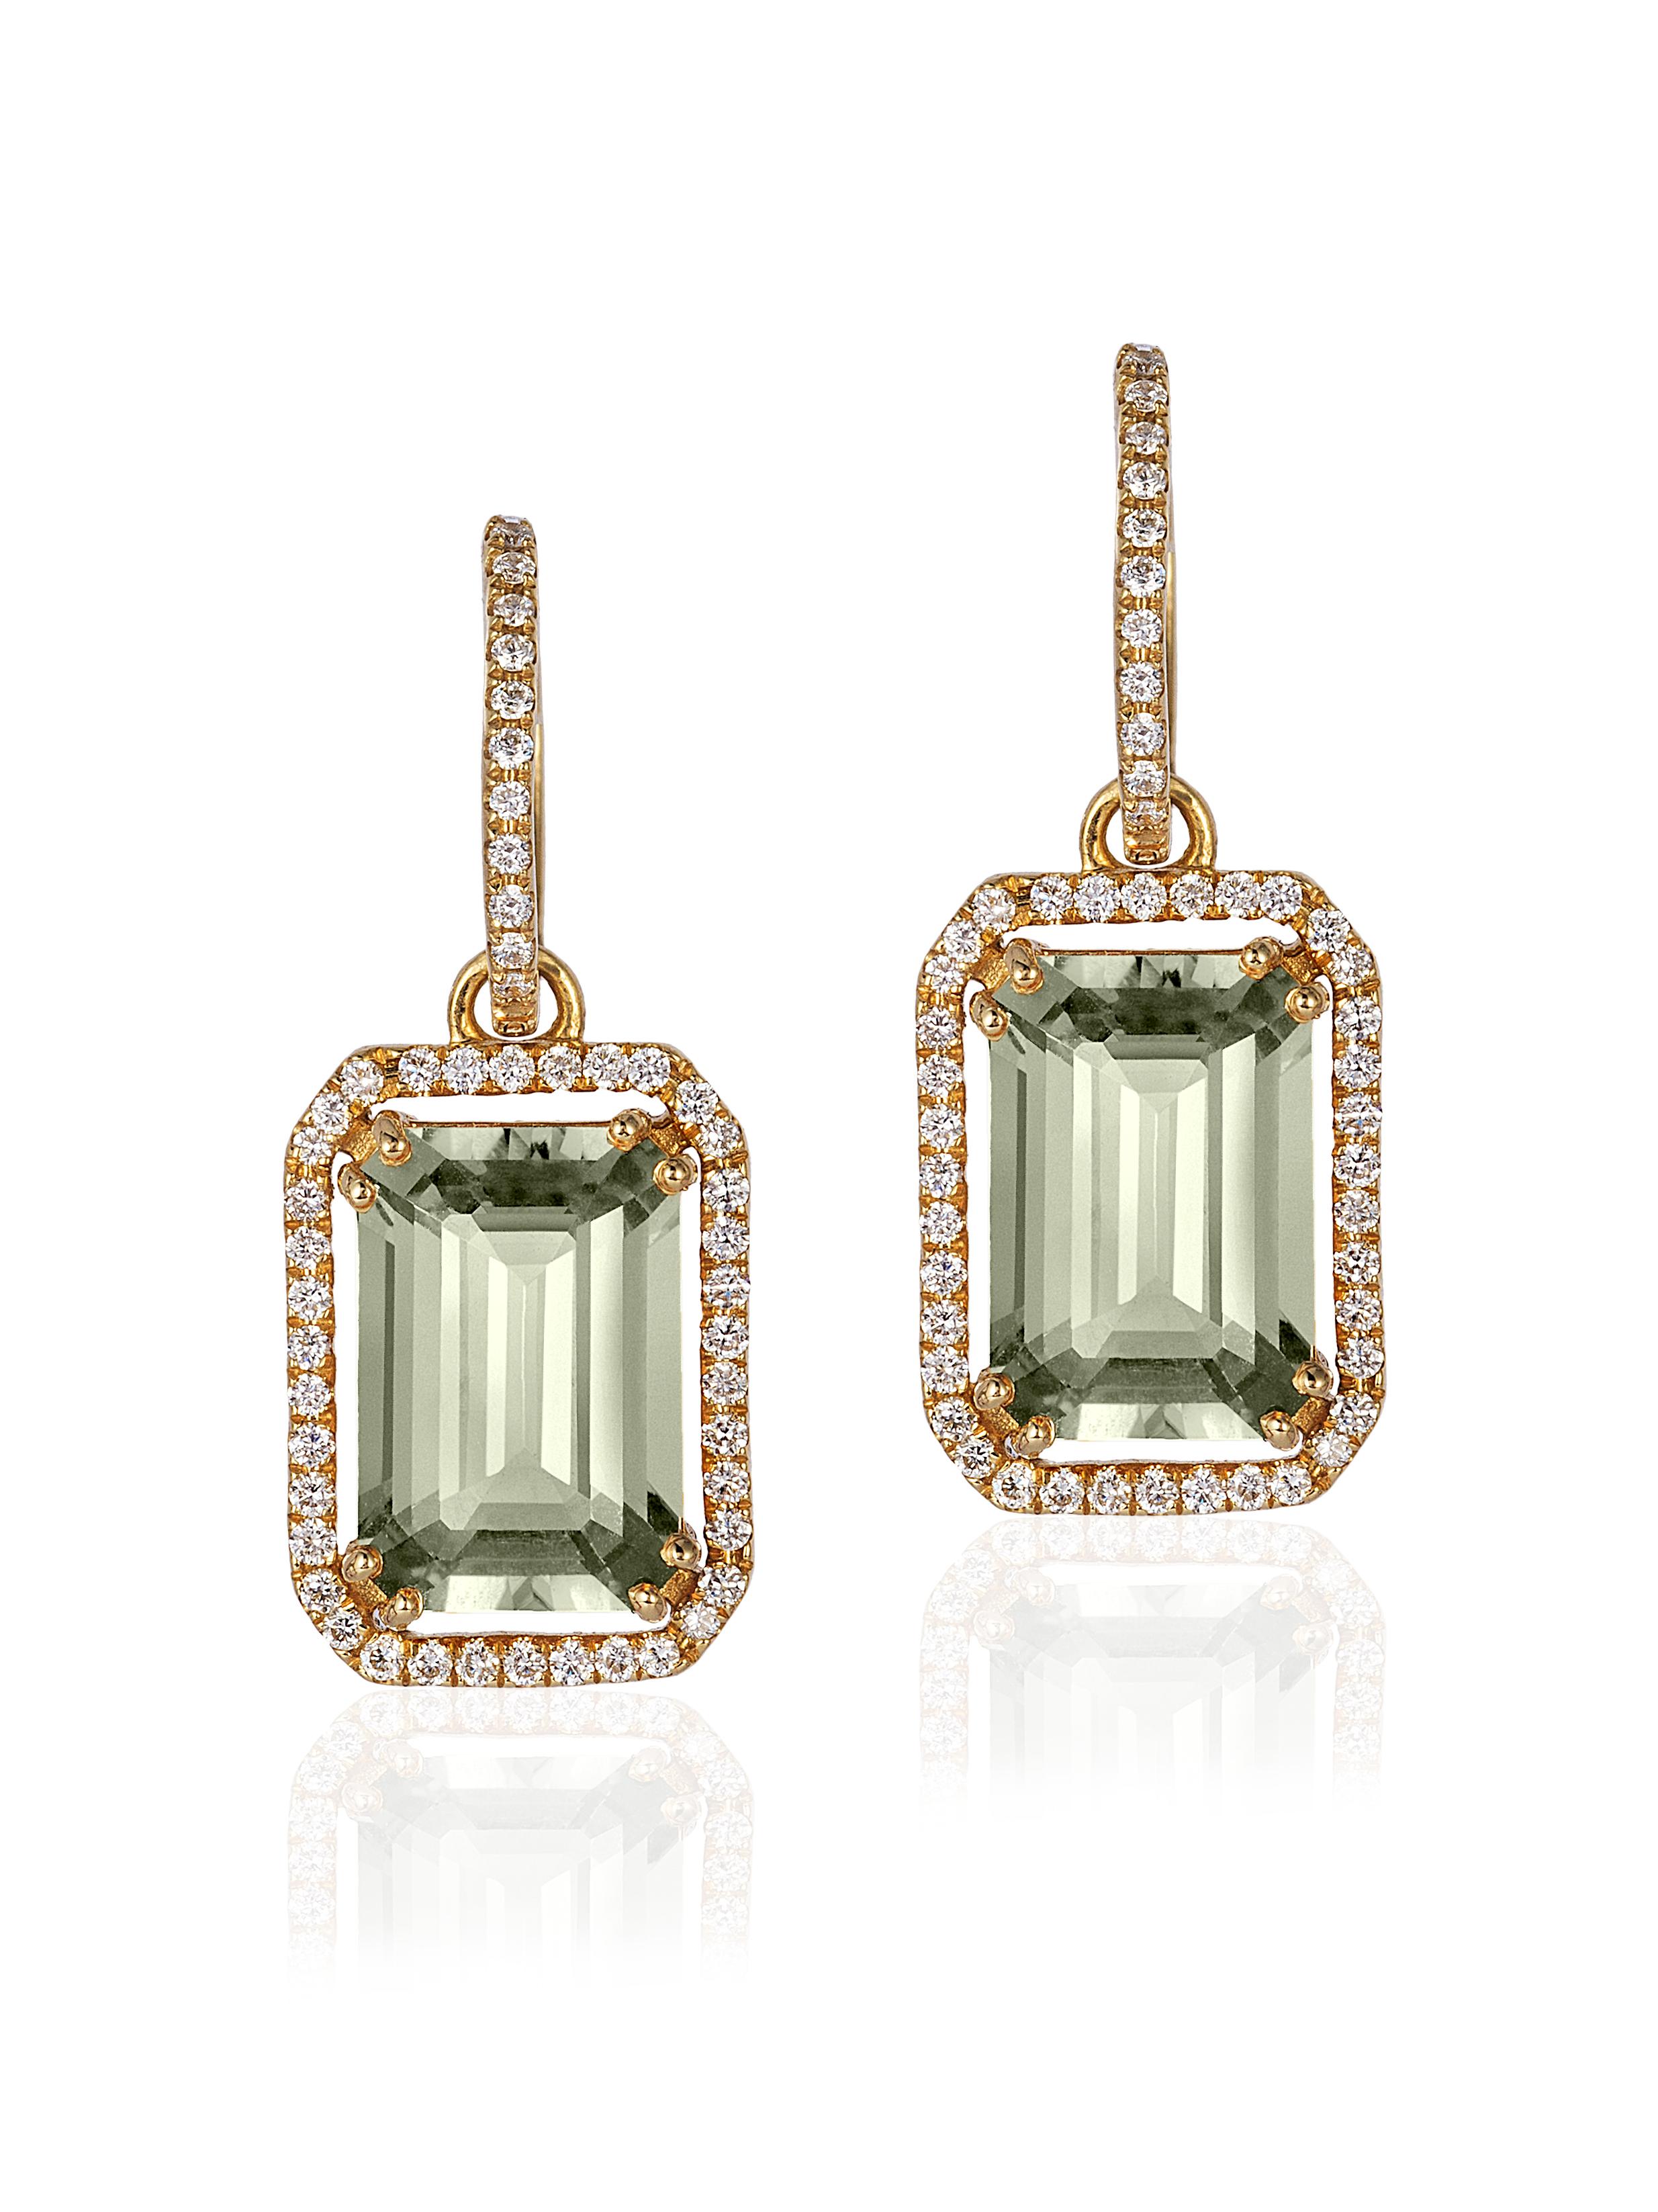 Prasiolite Cut Earrings with Diamond Trim in 18k, from 'Gossip' Collection
Hoops can be worn separately 
Stone Size: 12 x 8 mm 
Diamonds: G-H / VS, Approx. Wt:  0.40 Carat